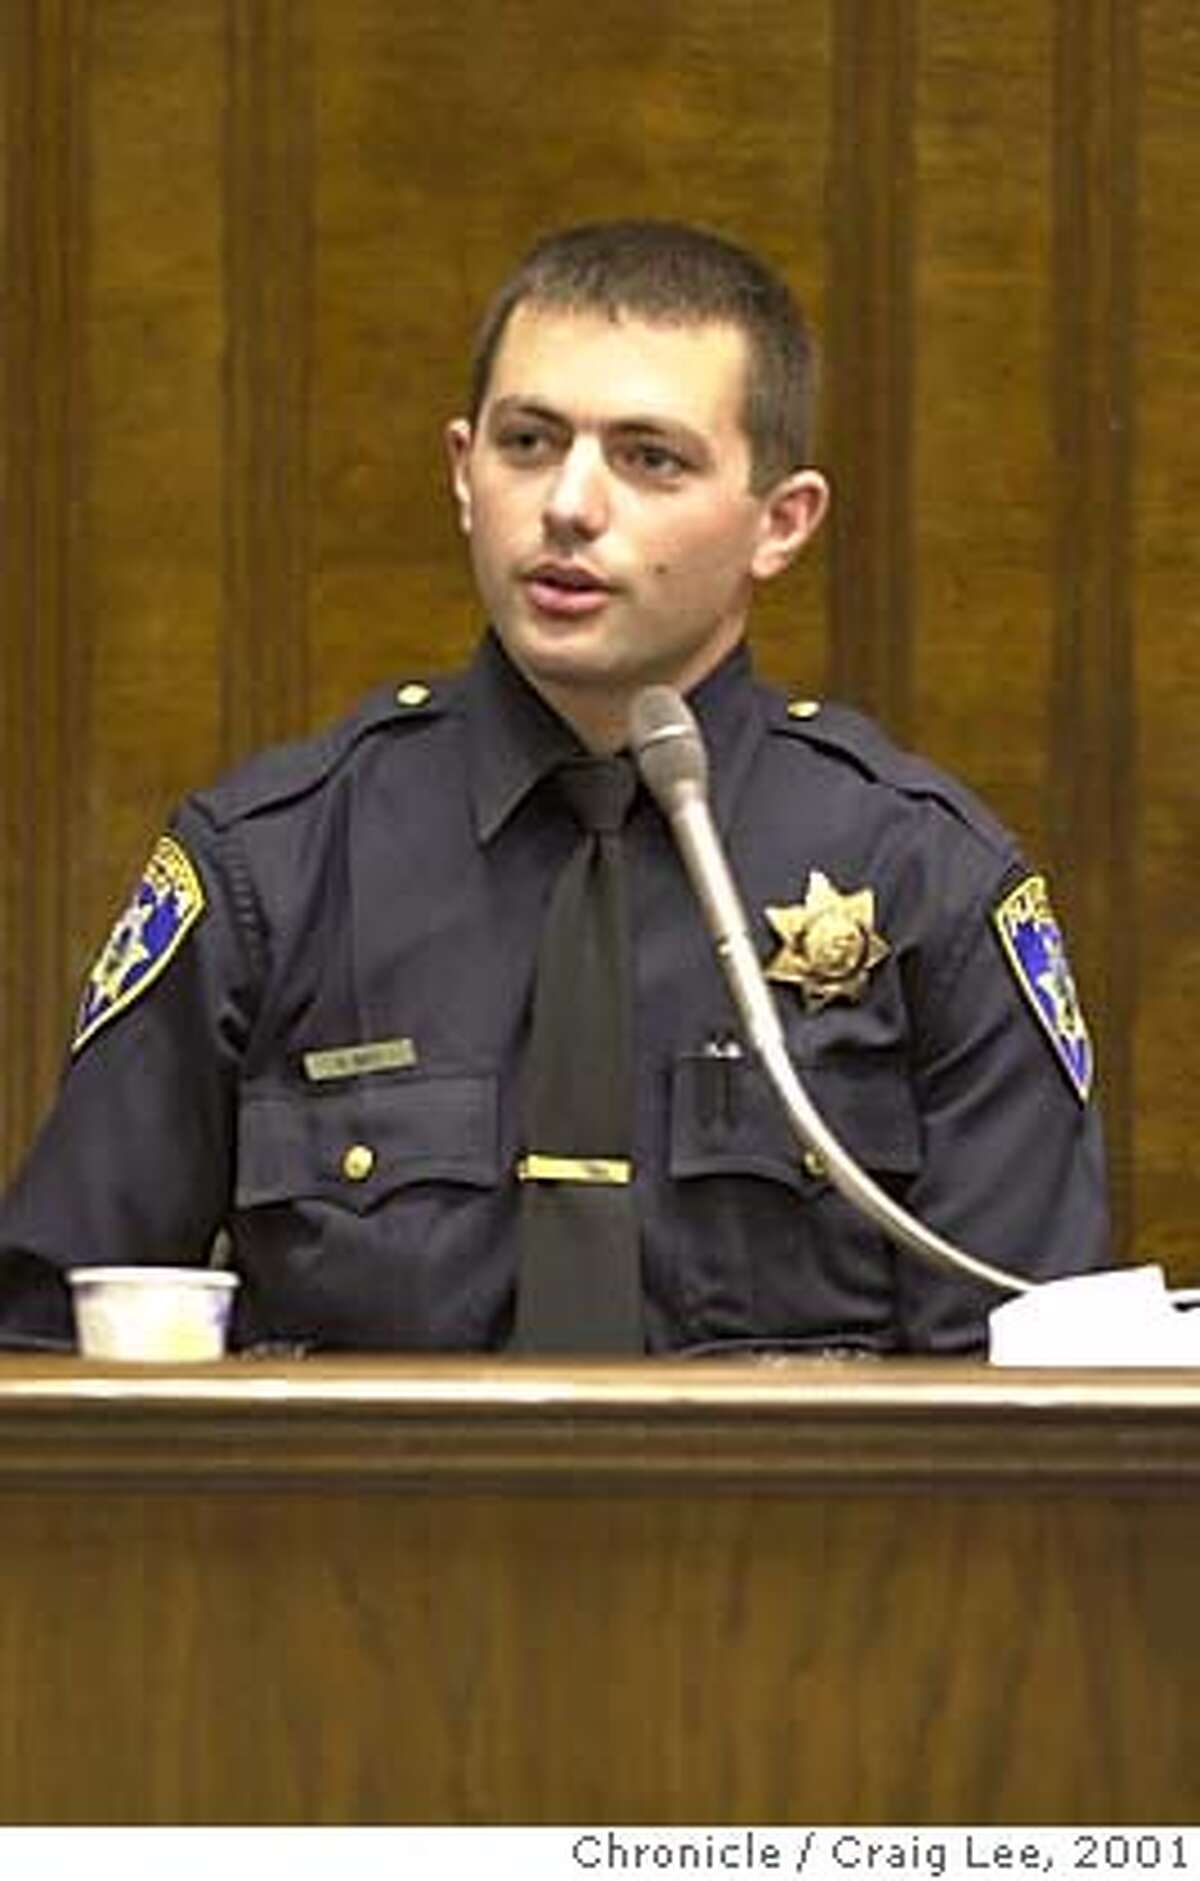 RIDERS08-C-07JUN01-MT-CL Keith Batt, a former rookie Oakland Police Officer, testifies about working with the Riders, a group of four cops charged with corruption based on his tip to superiors that they were planting drugs on suspects and roughing them up on the night shift. Batt now works as a cop in Pleasanton. Photo by Craig Lee/San Francisco Chronicle ALSO RAN 9/18/02, 5/30/03, 10/01/03 CAT w/JURORS